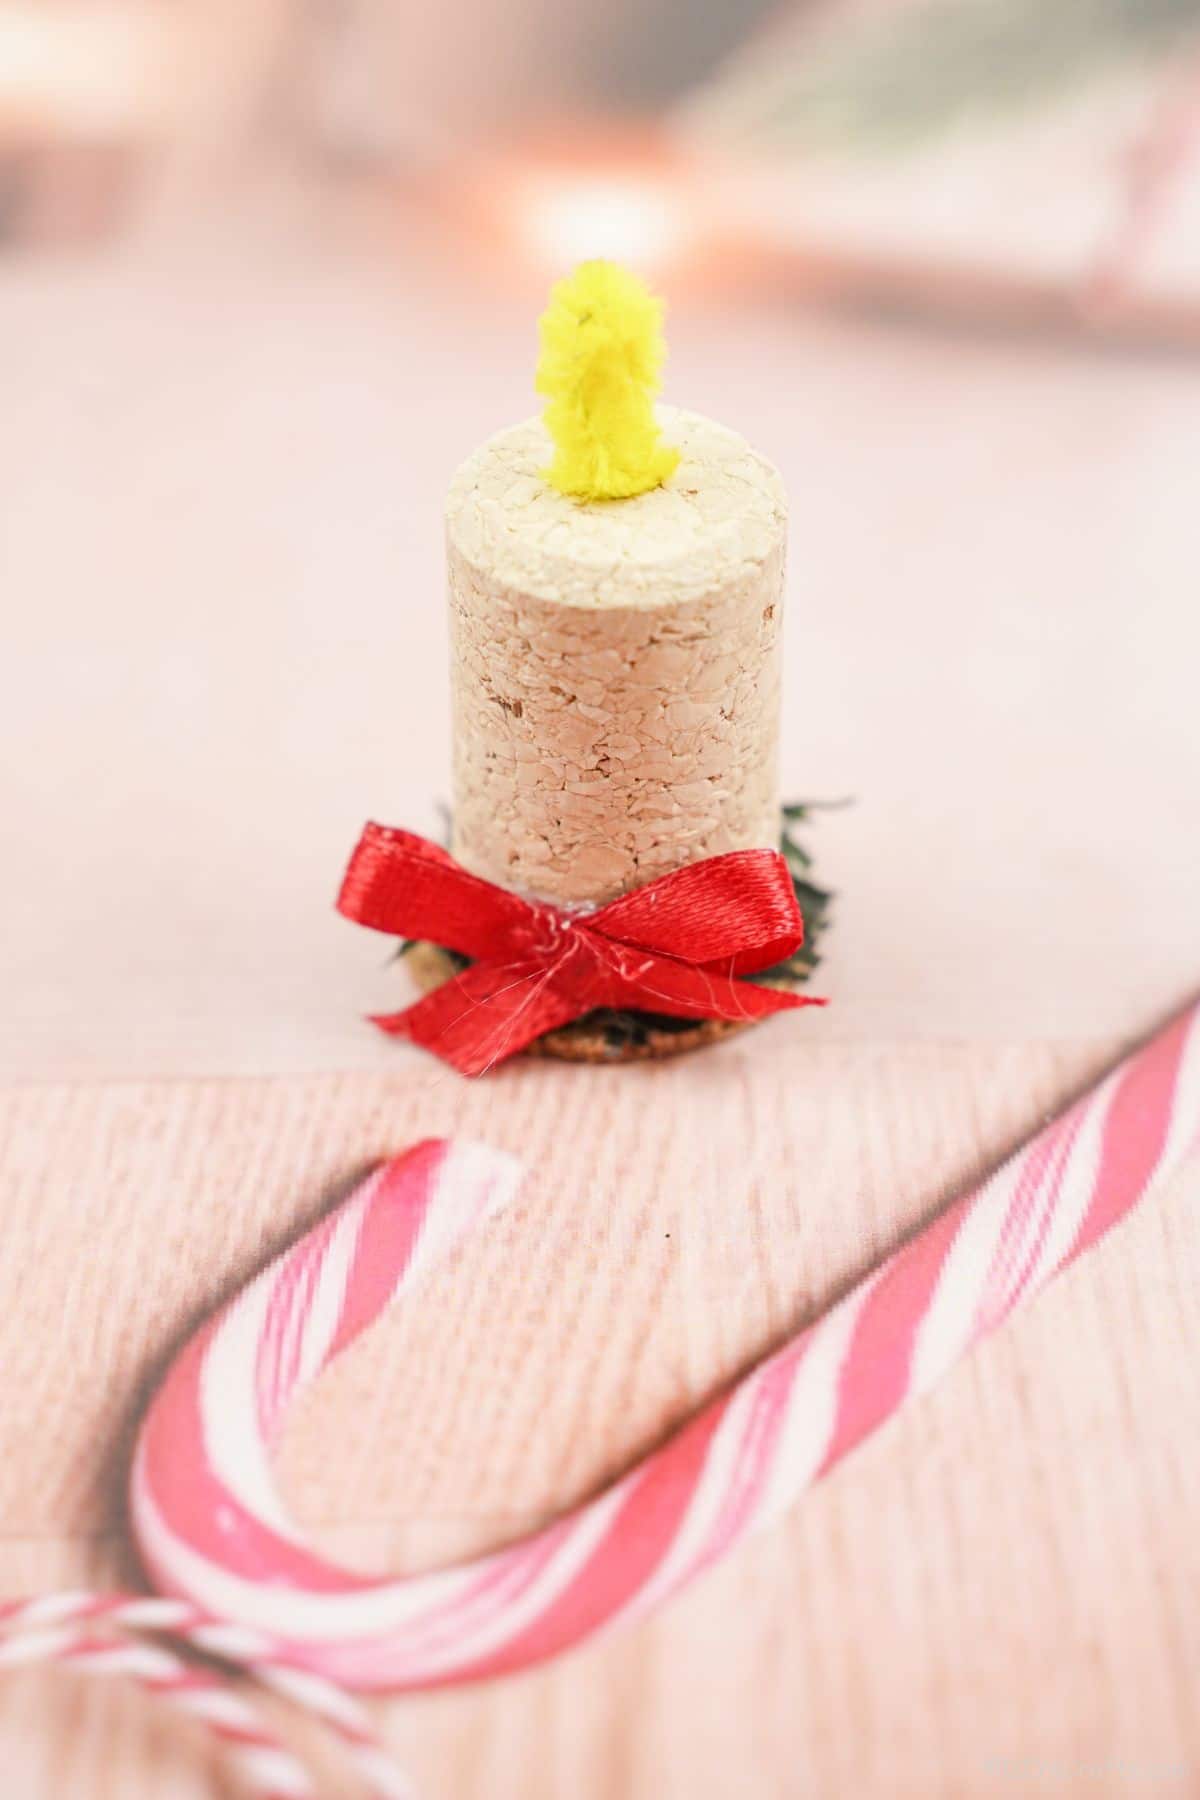 wien cork candle on holiady themed paper with candy cane